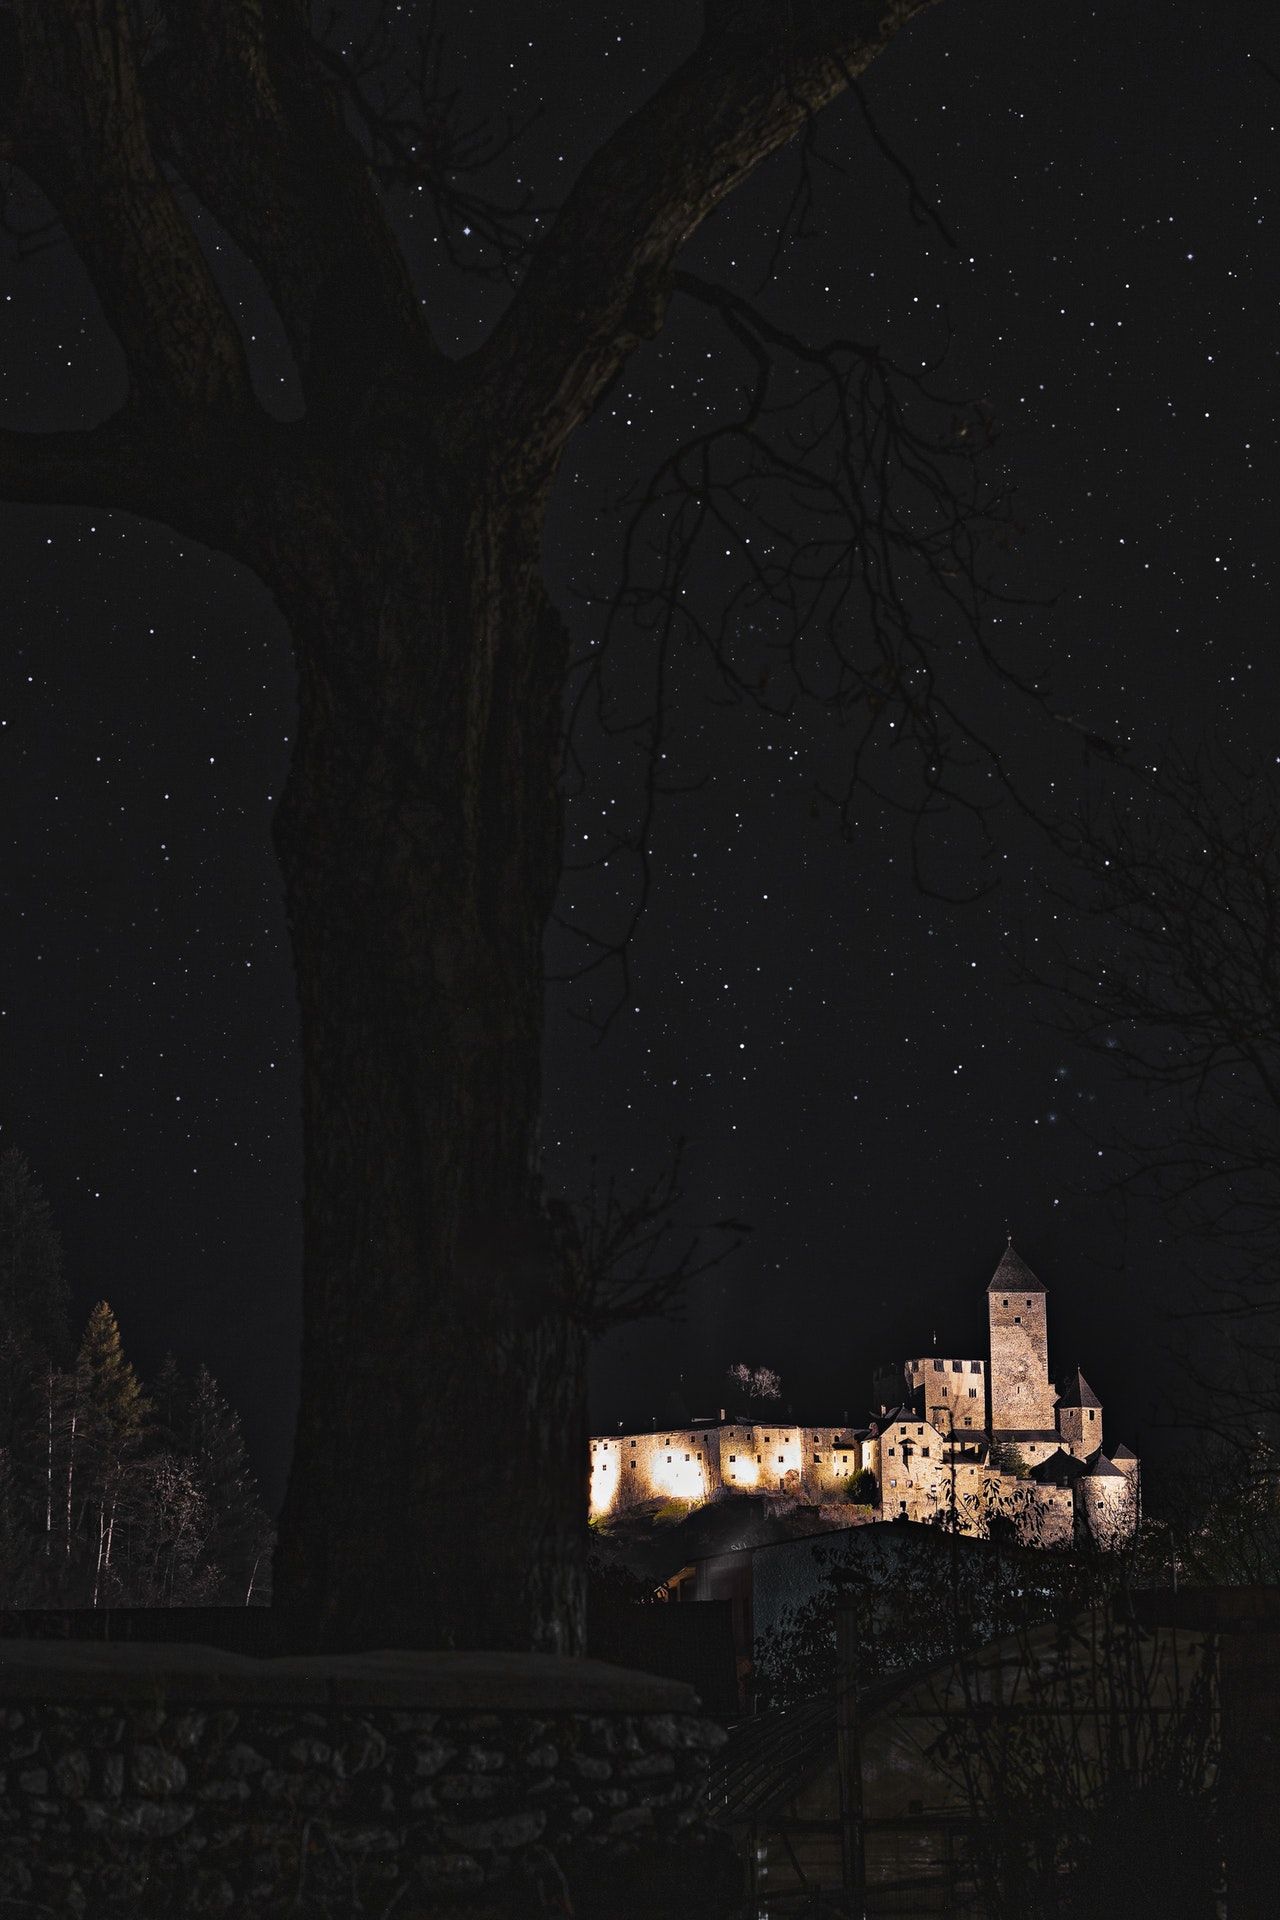 A tree with stars in the sky - Castle